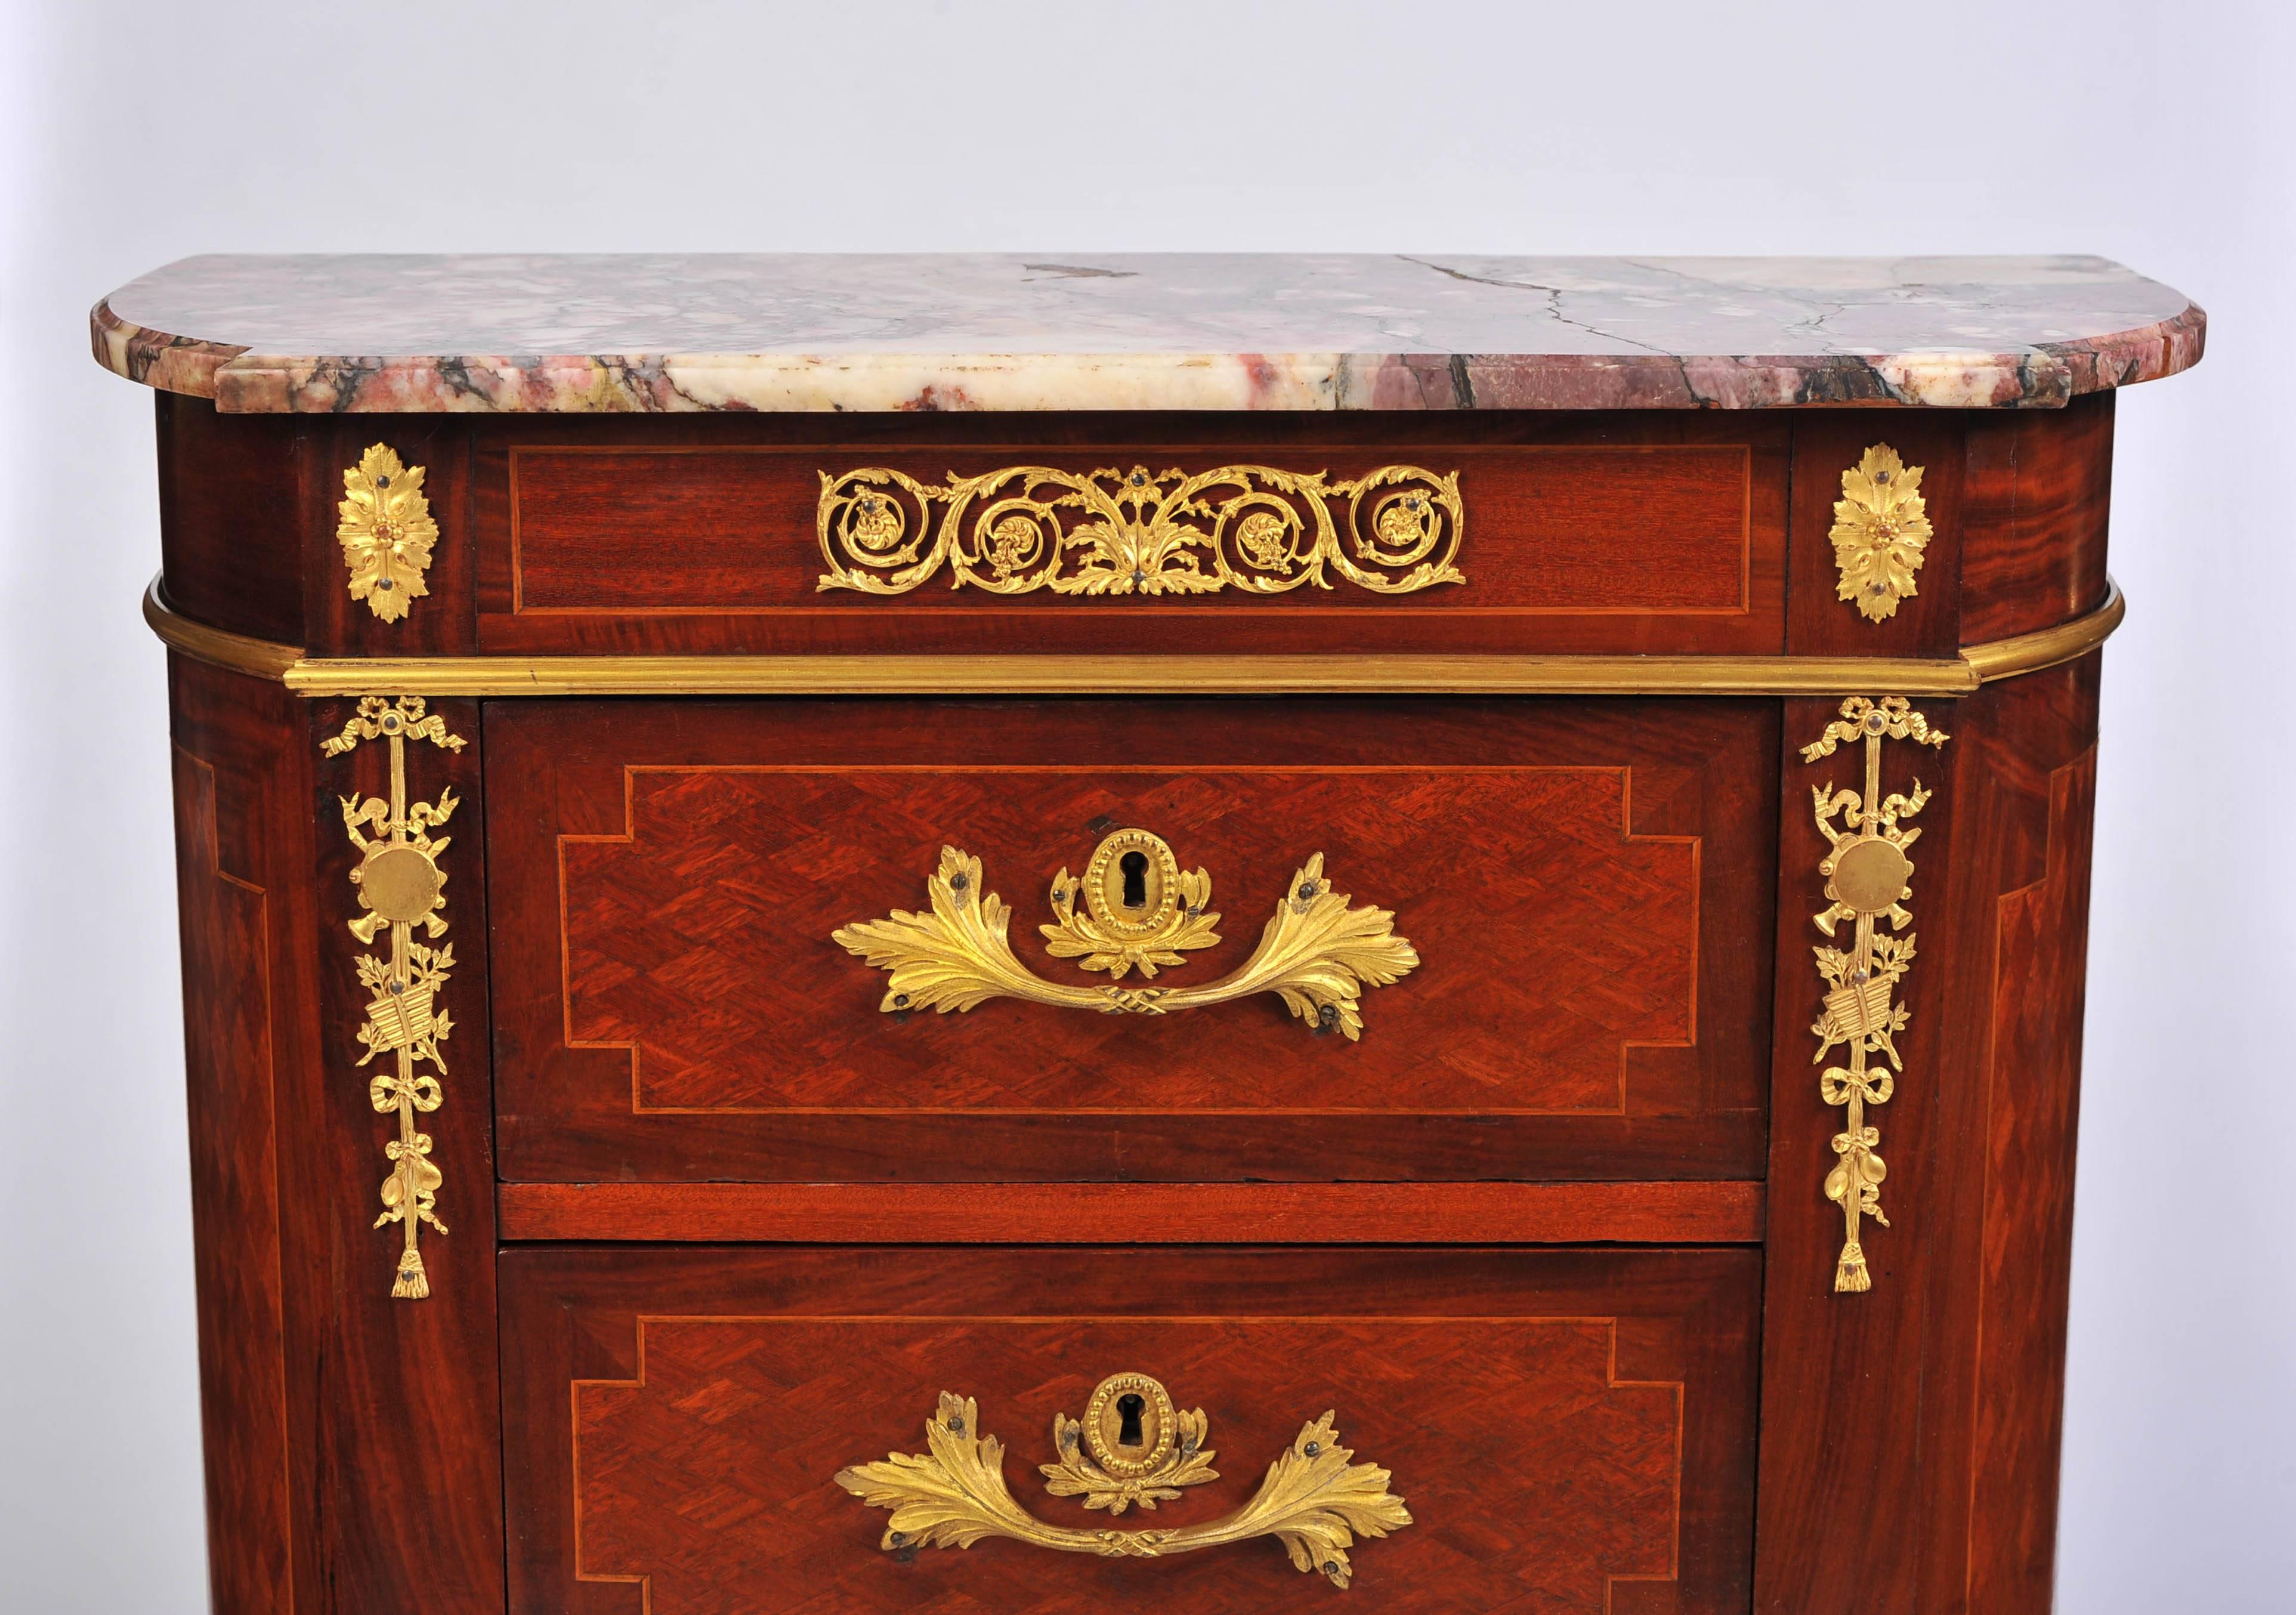 A charming Fin de Siecle mahogany petite commode in the Louis XVI style, the three drawers each with double throw locks below the original variegated marble top and enriched throughout with fine quality gilt metal mounts.
   